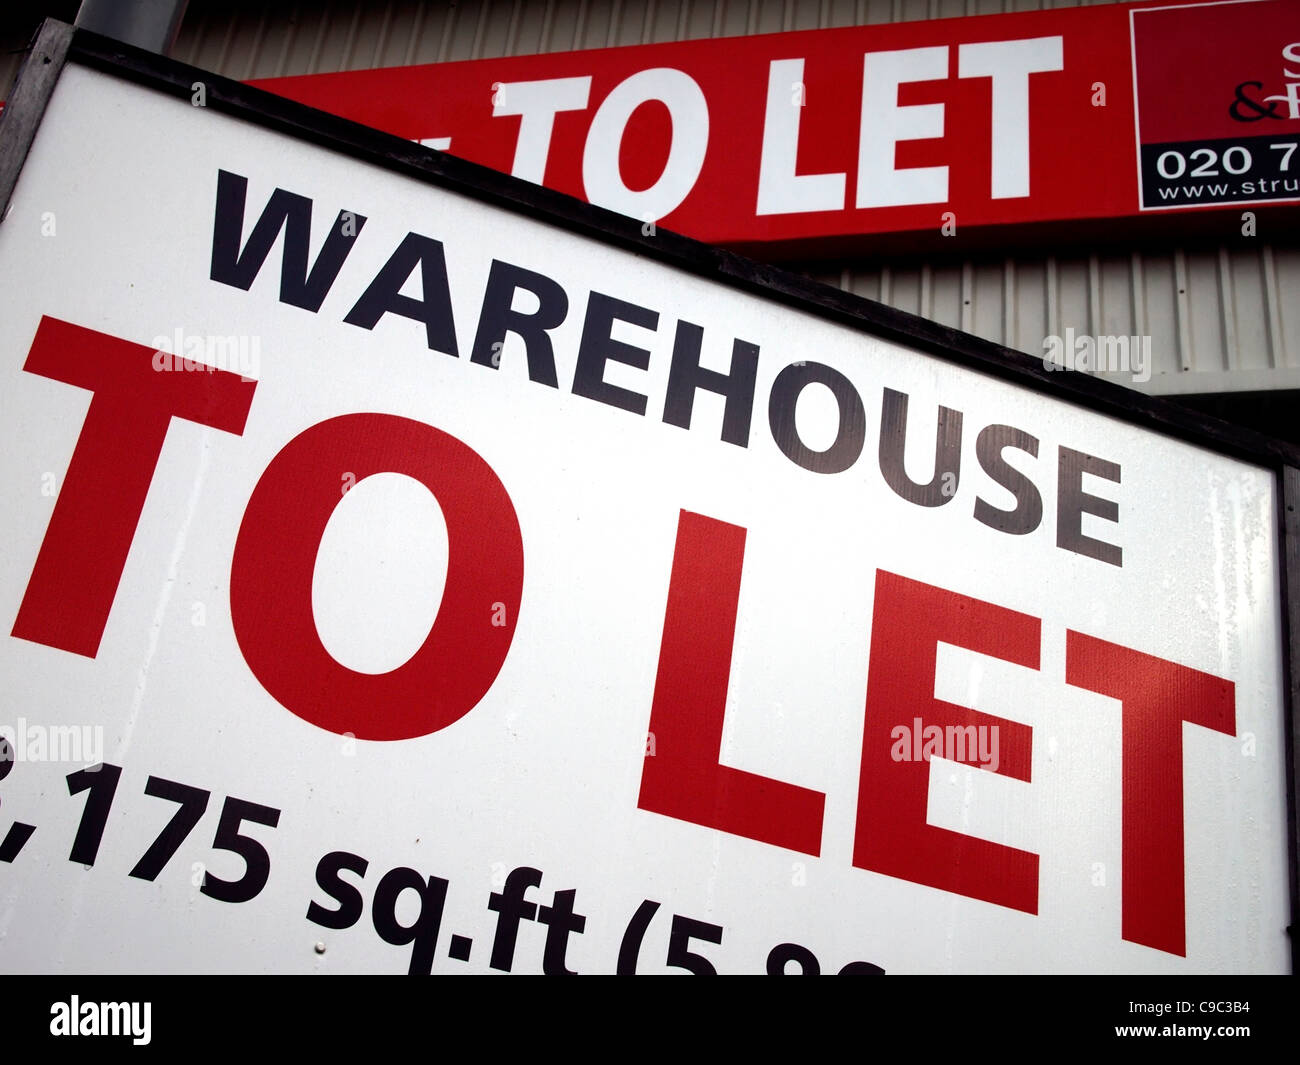 'To-let' signs outside a warehouse in England. Stock Photo